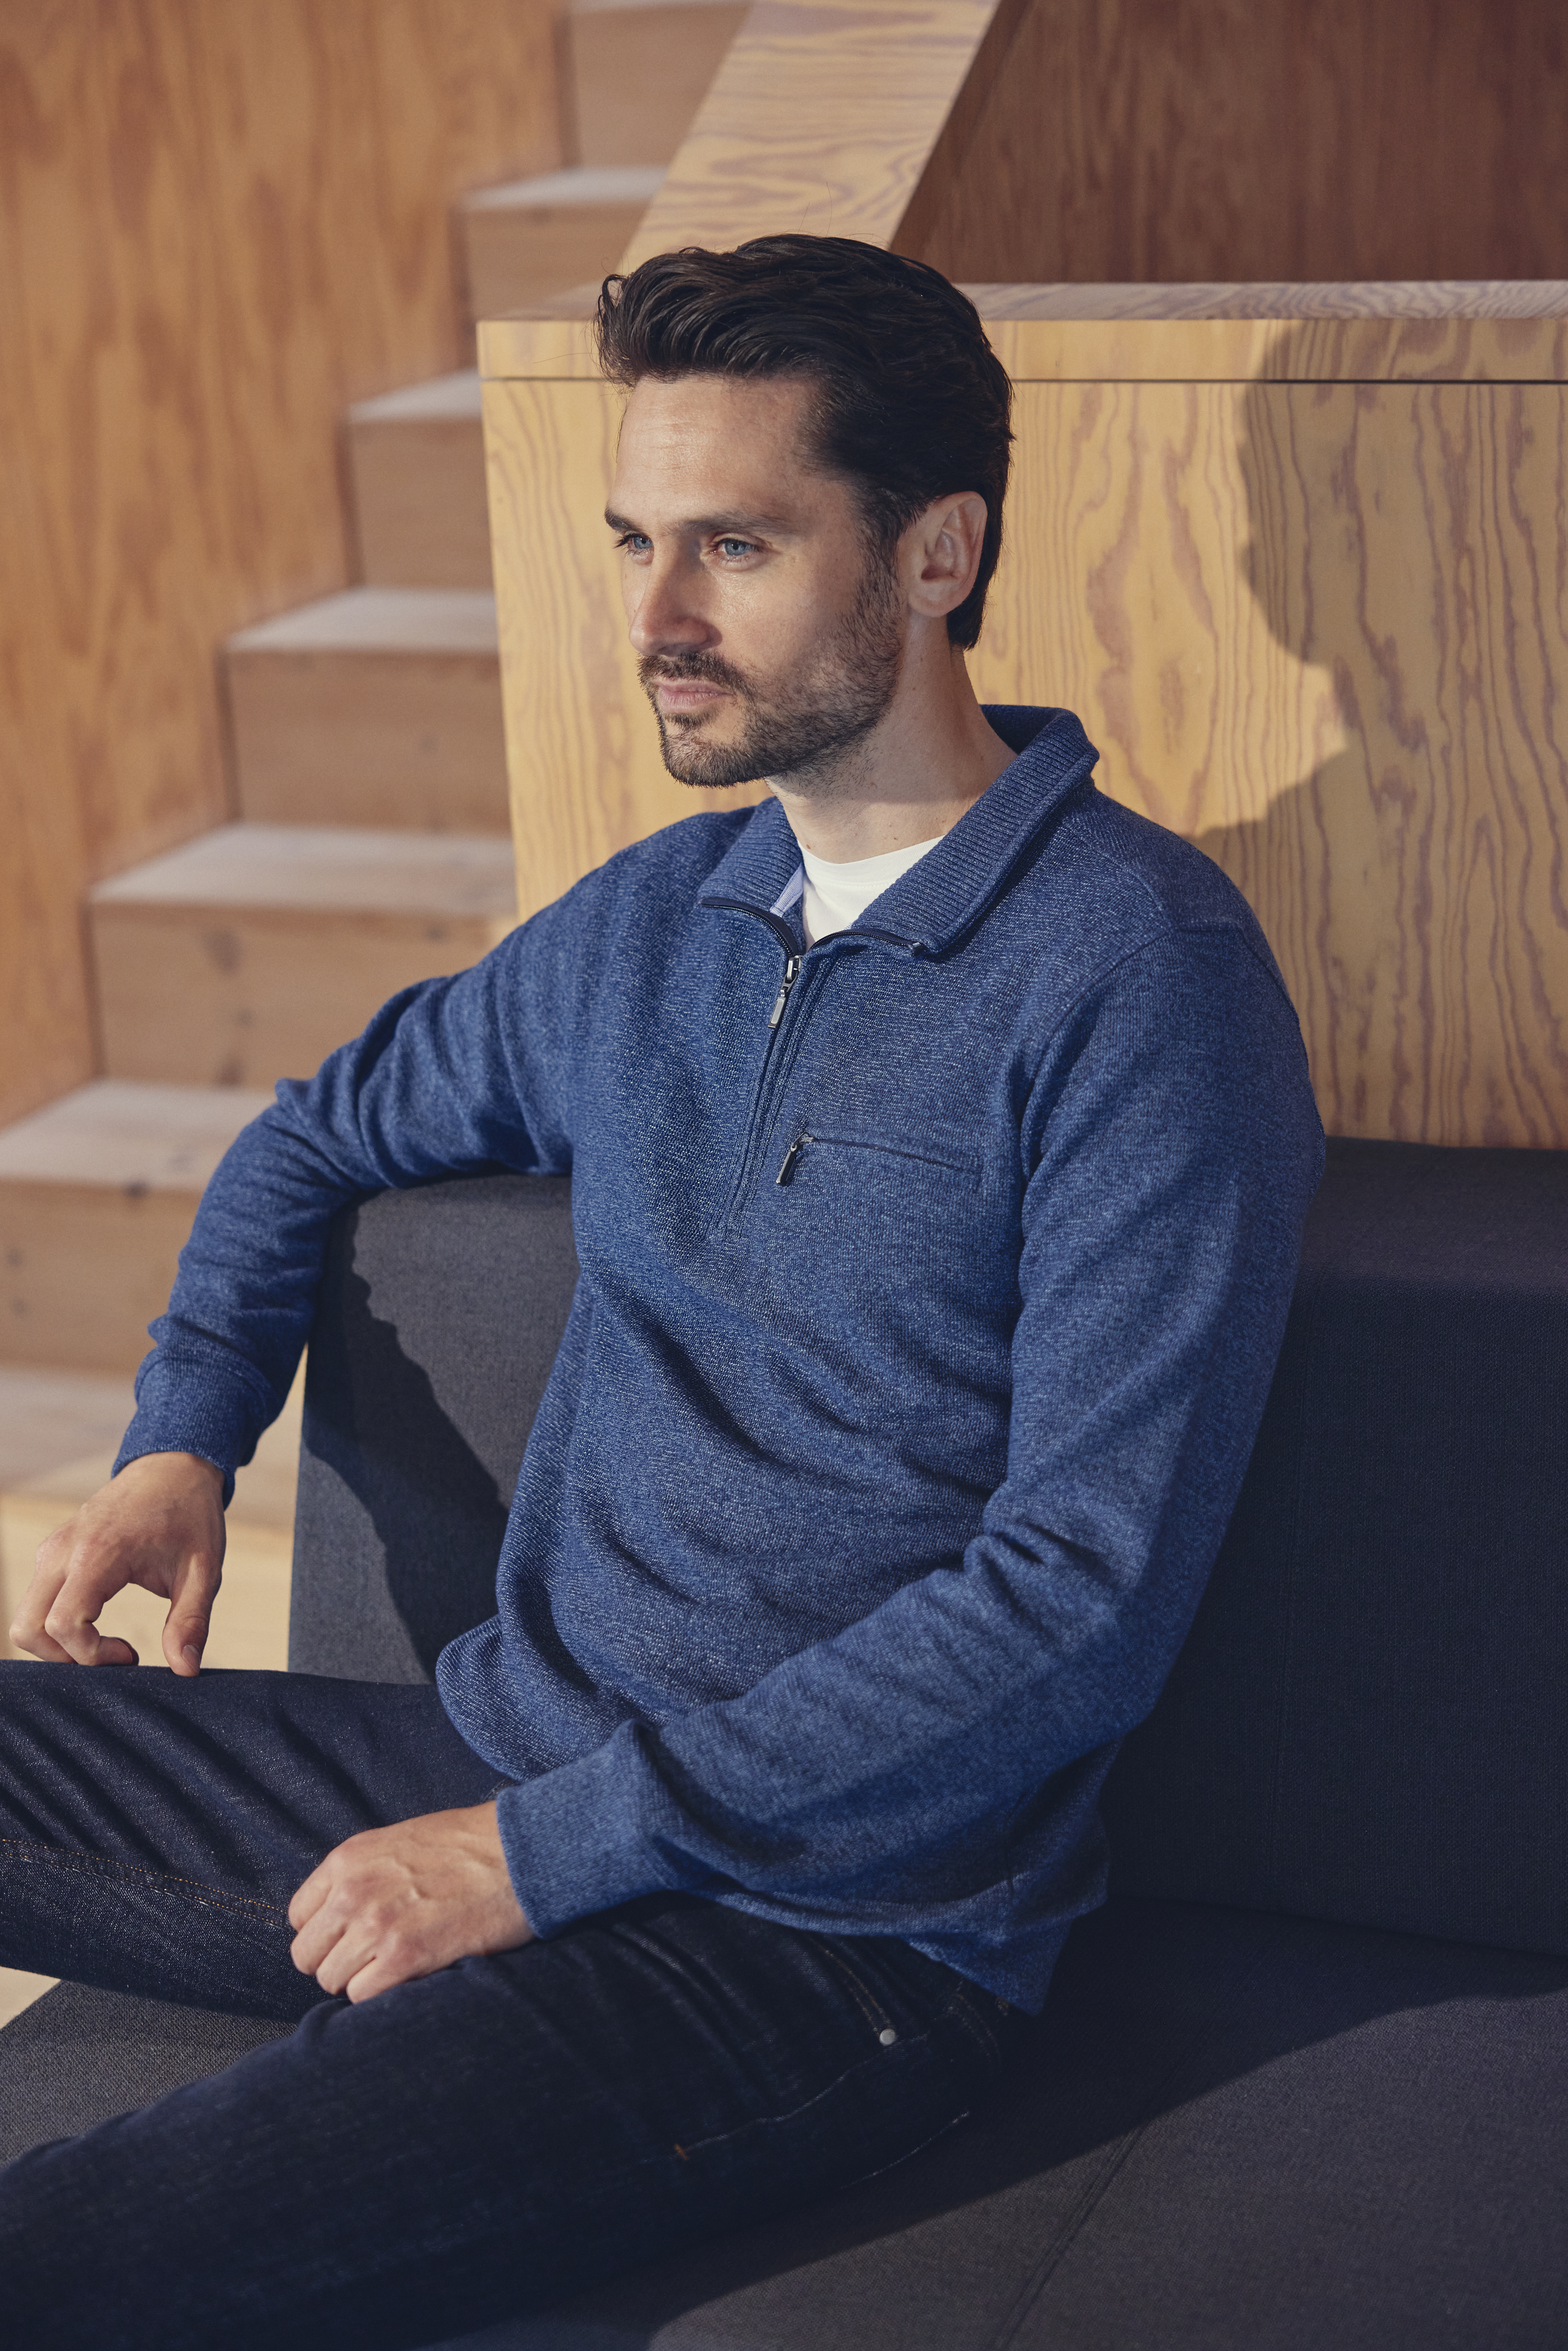 roll neck from Belika knitwear - durable and elegant grey pullover with long sleeves. 